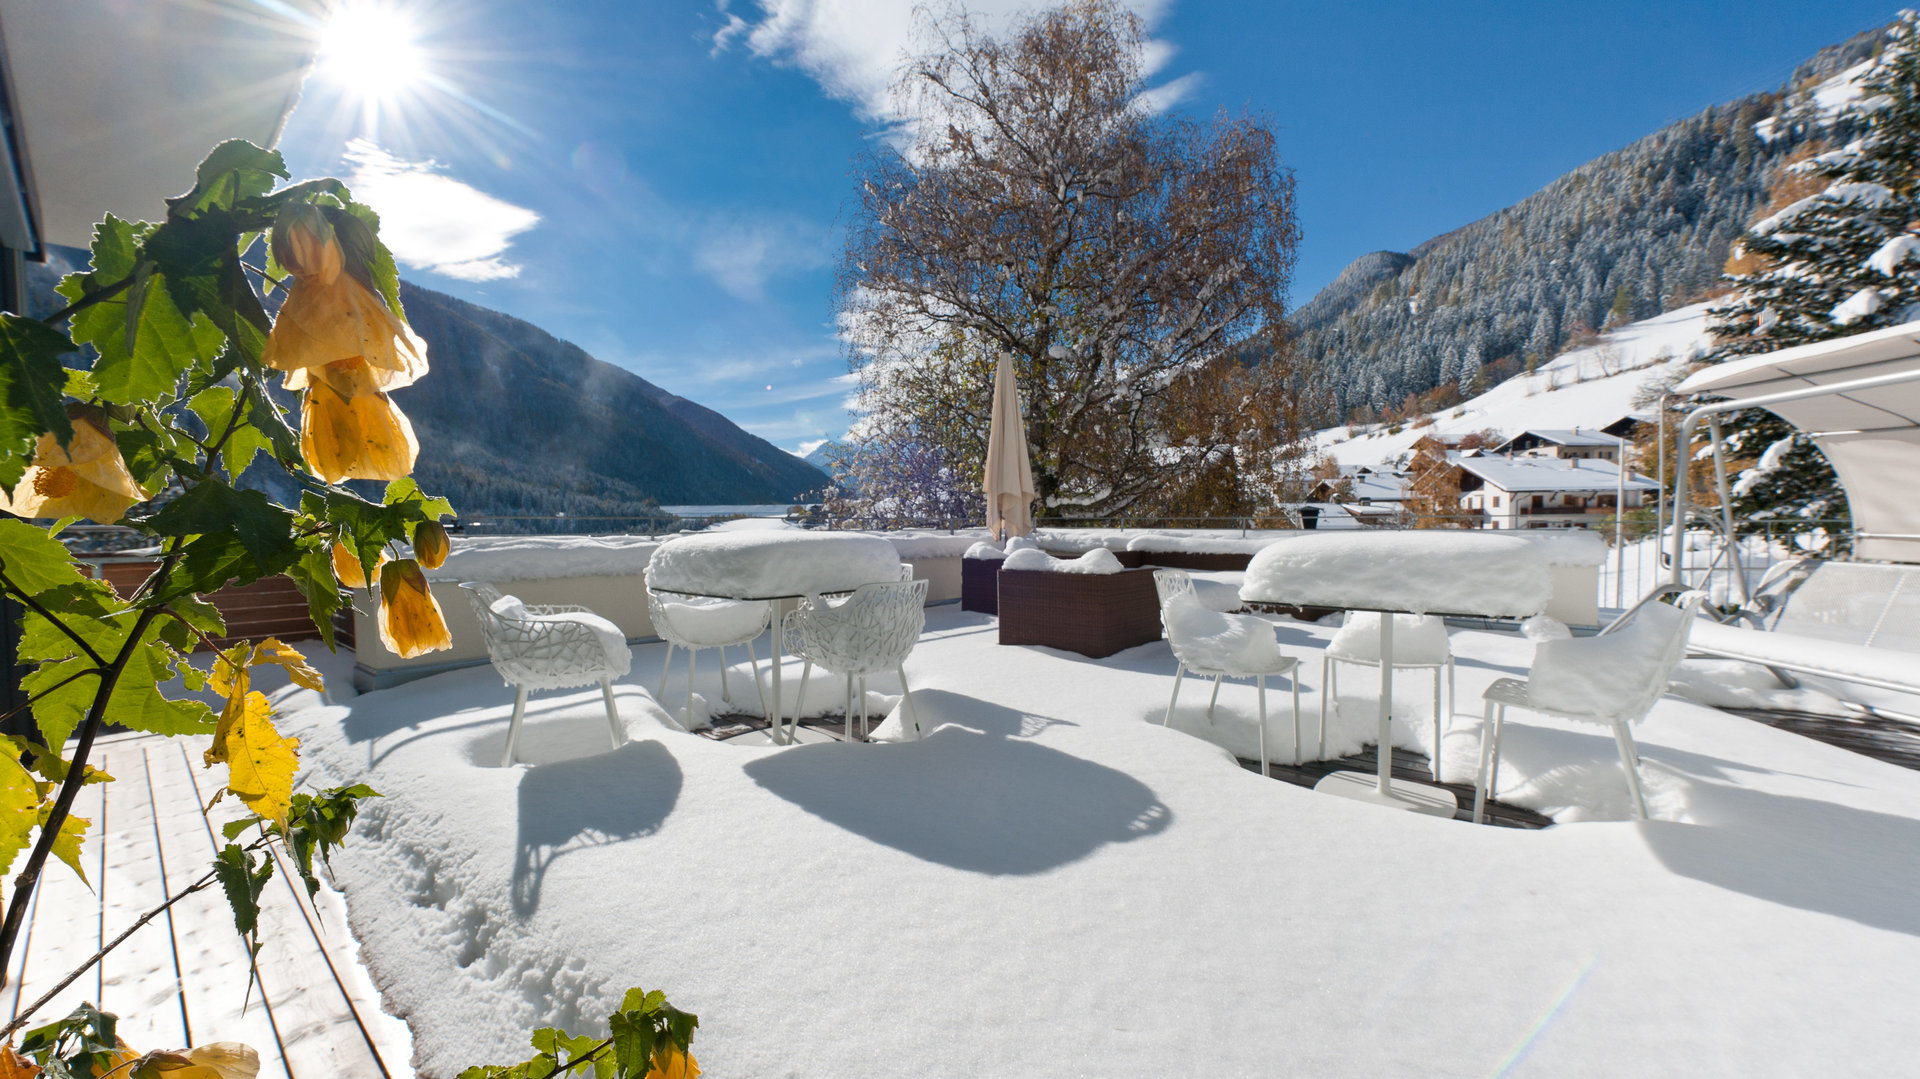 Hotel Schweigl in Ultental Valley in sunny location with mountain view.